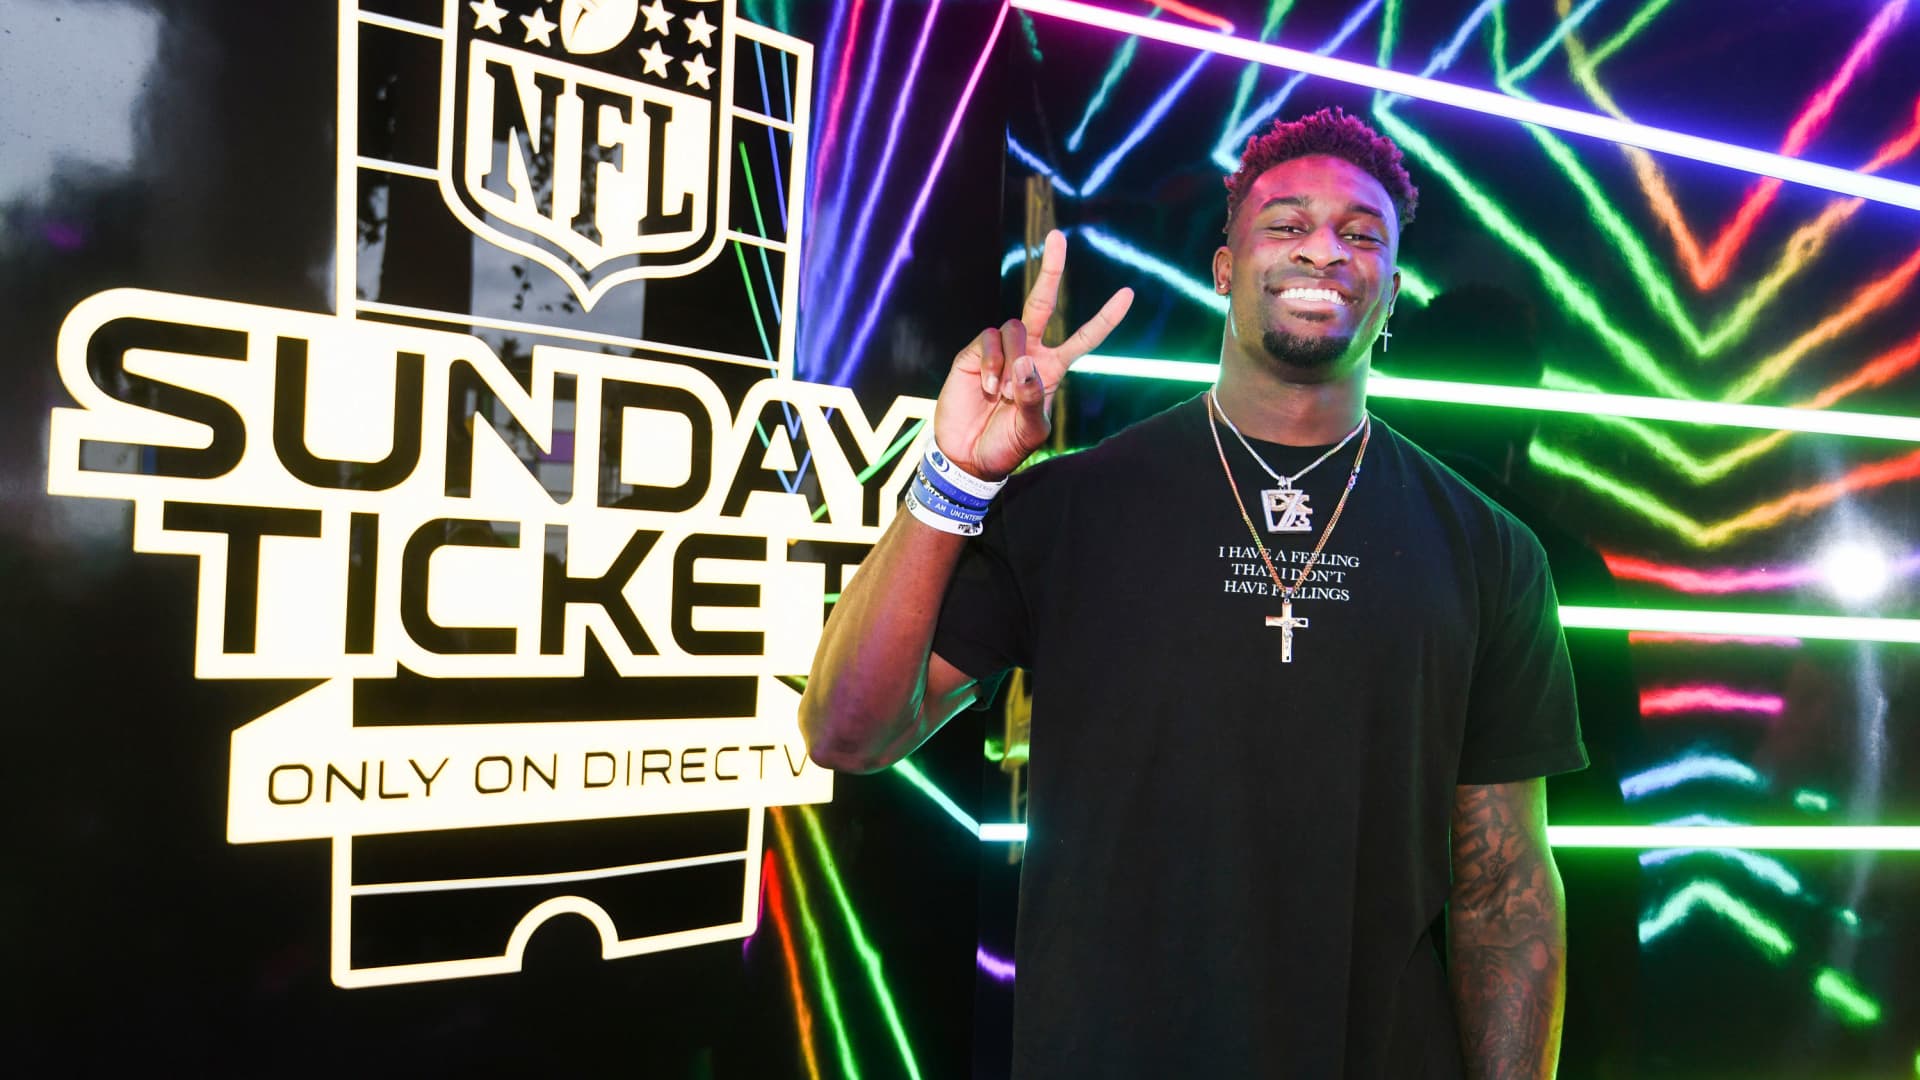 DK Metcalf, of the Seattle Seahawks, during a Meet & Greet with DIRECTV NFL SUNDAY TICKET subscribers at the DIRECTV NFL SUNDAY TICKET Lounge on Saturday Feb. 1, 2020, in Miami, FL.